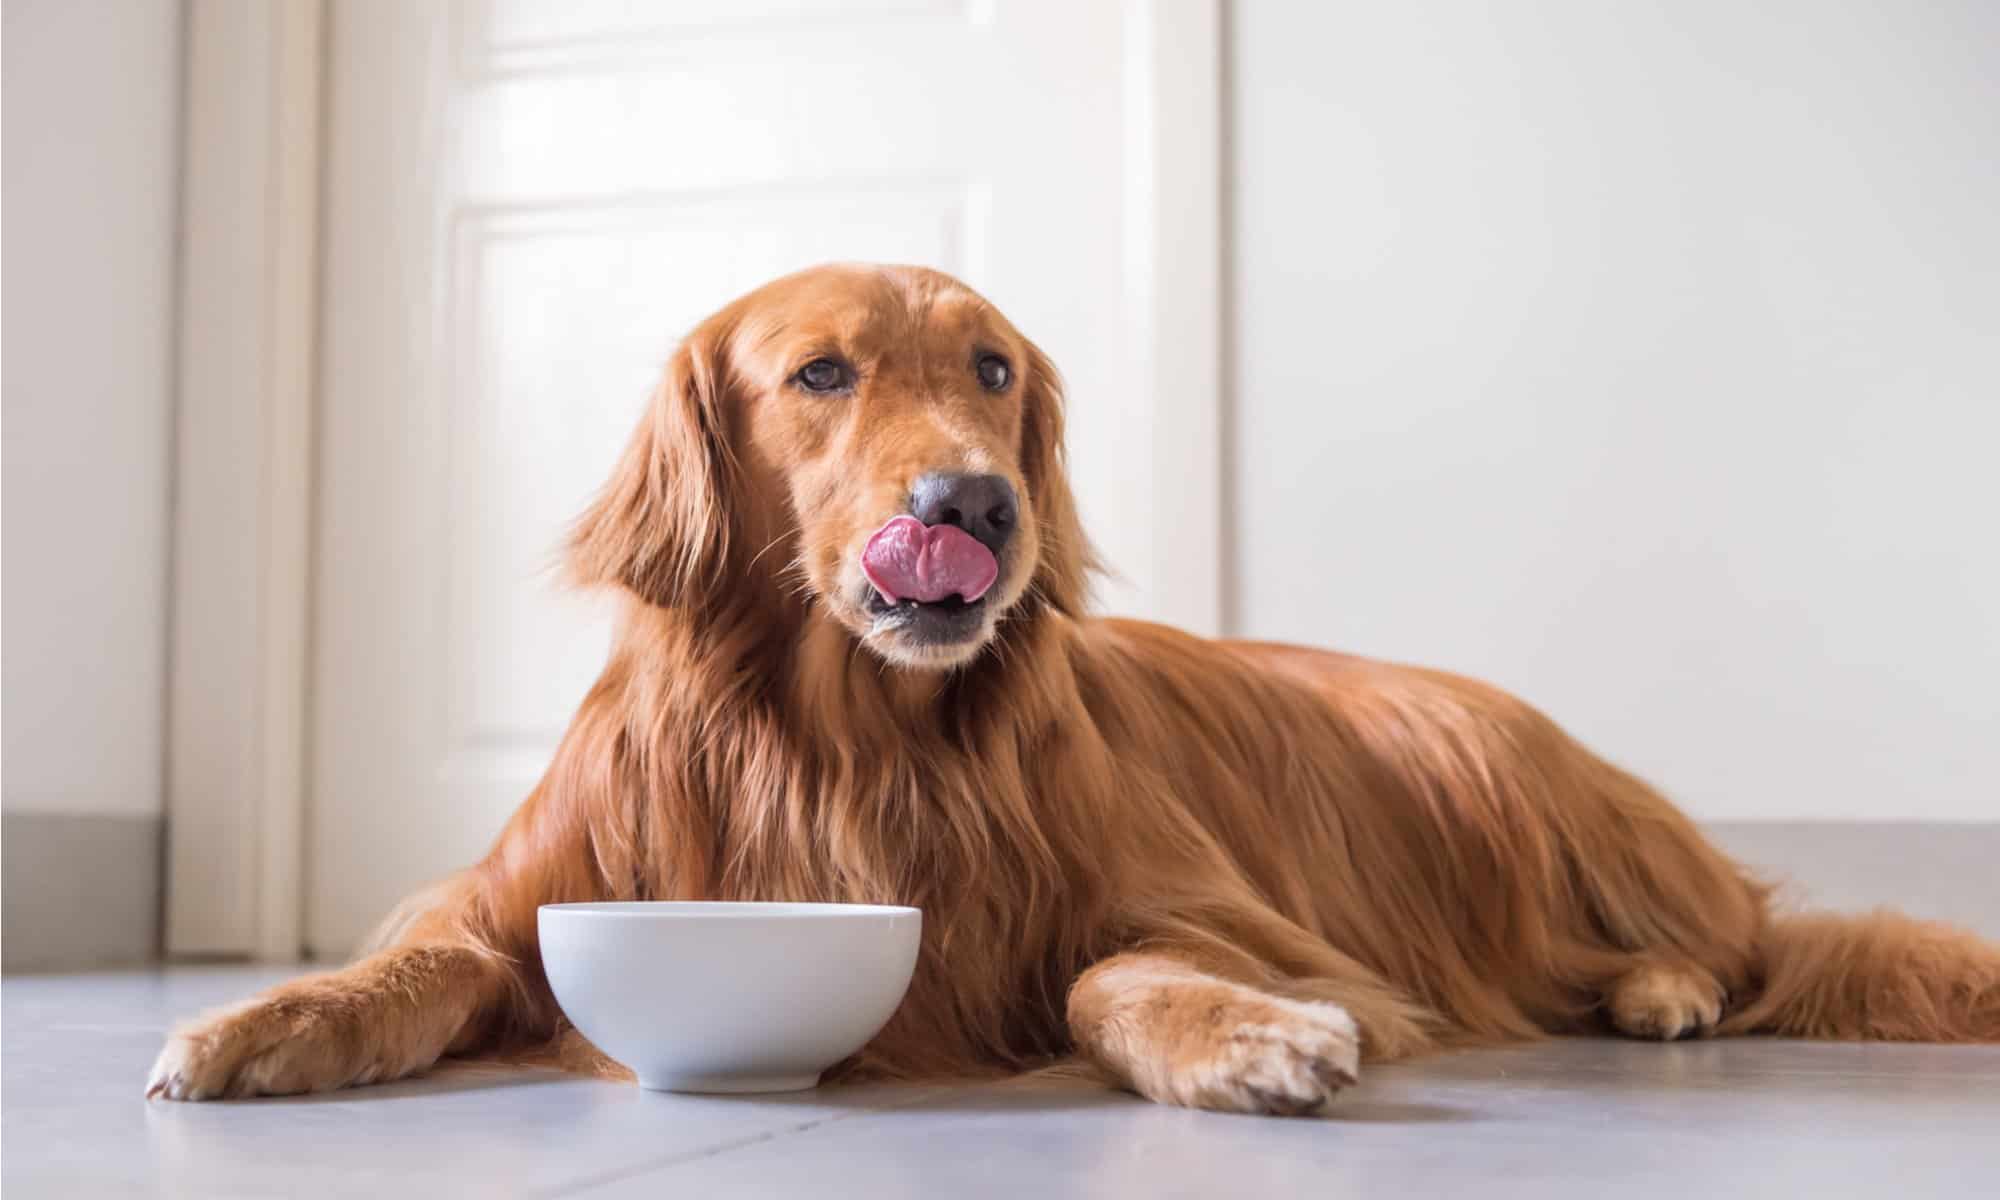 What website has the cheapest dog food?